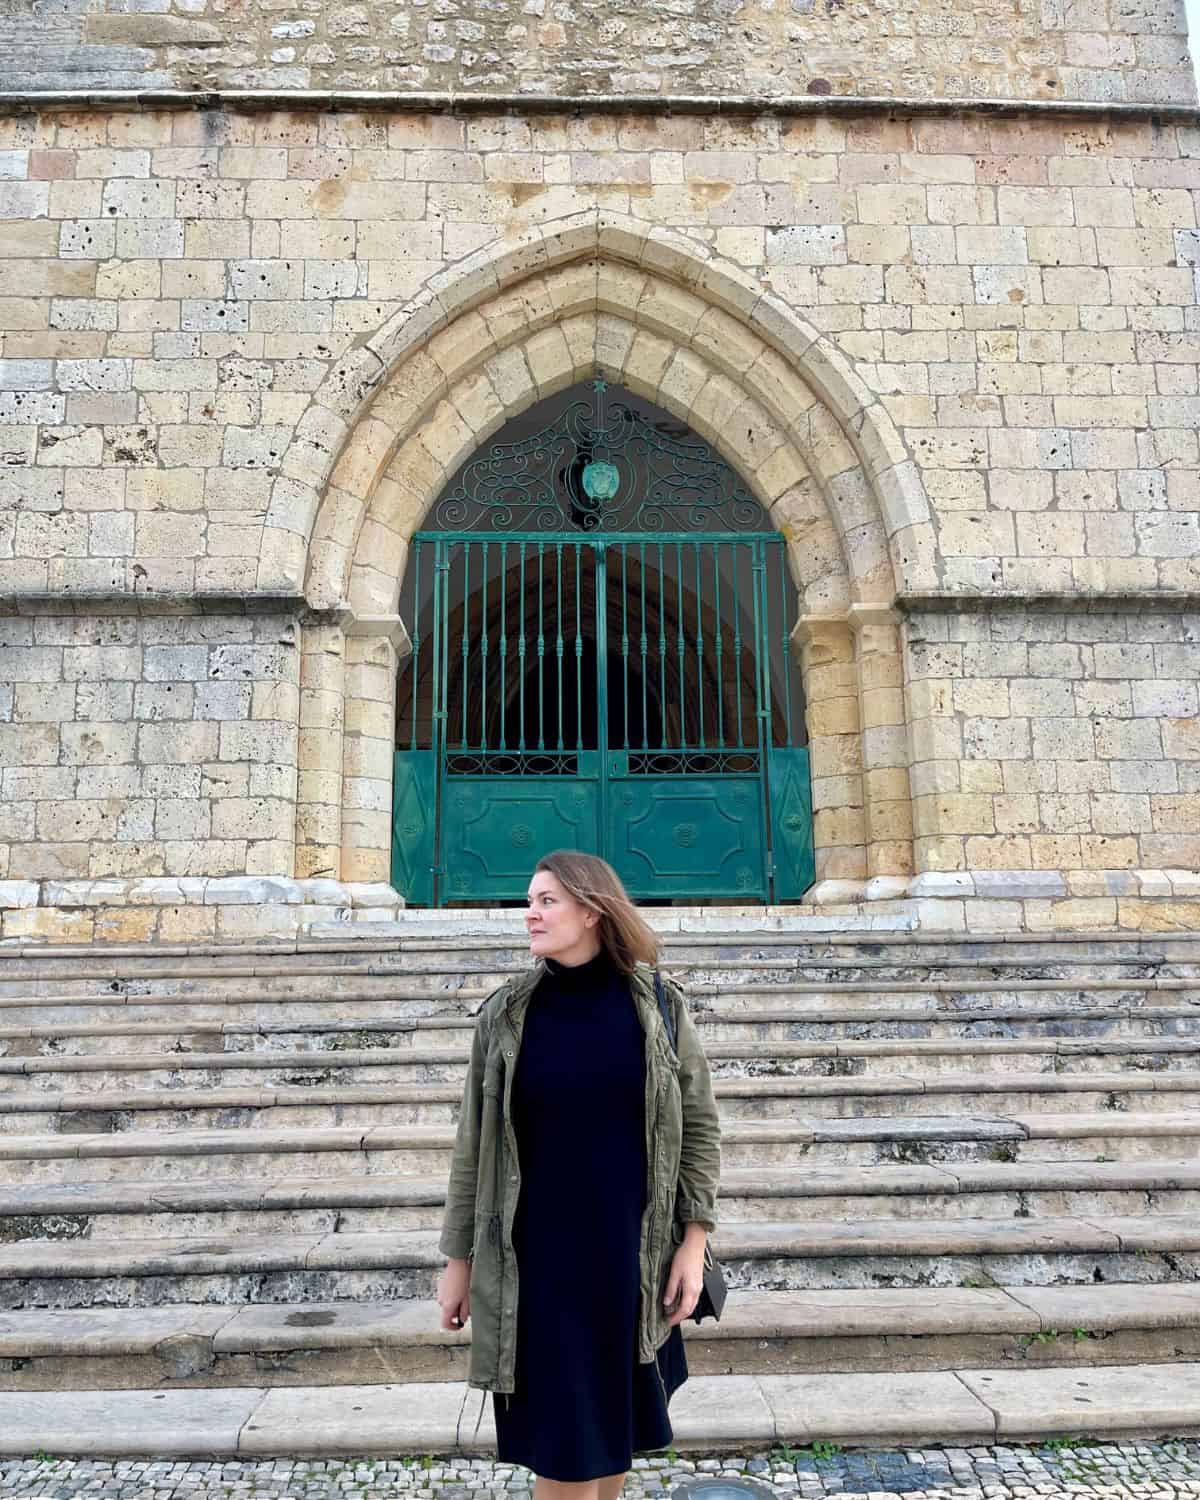 A woman in a black dress and a green jacket descends ancient stone steps in front of an imposing church door with intricate green metalwork. The setting evokes a sense of history and exploration, characteristic of solo travel adventures.